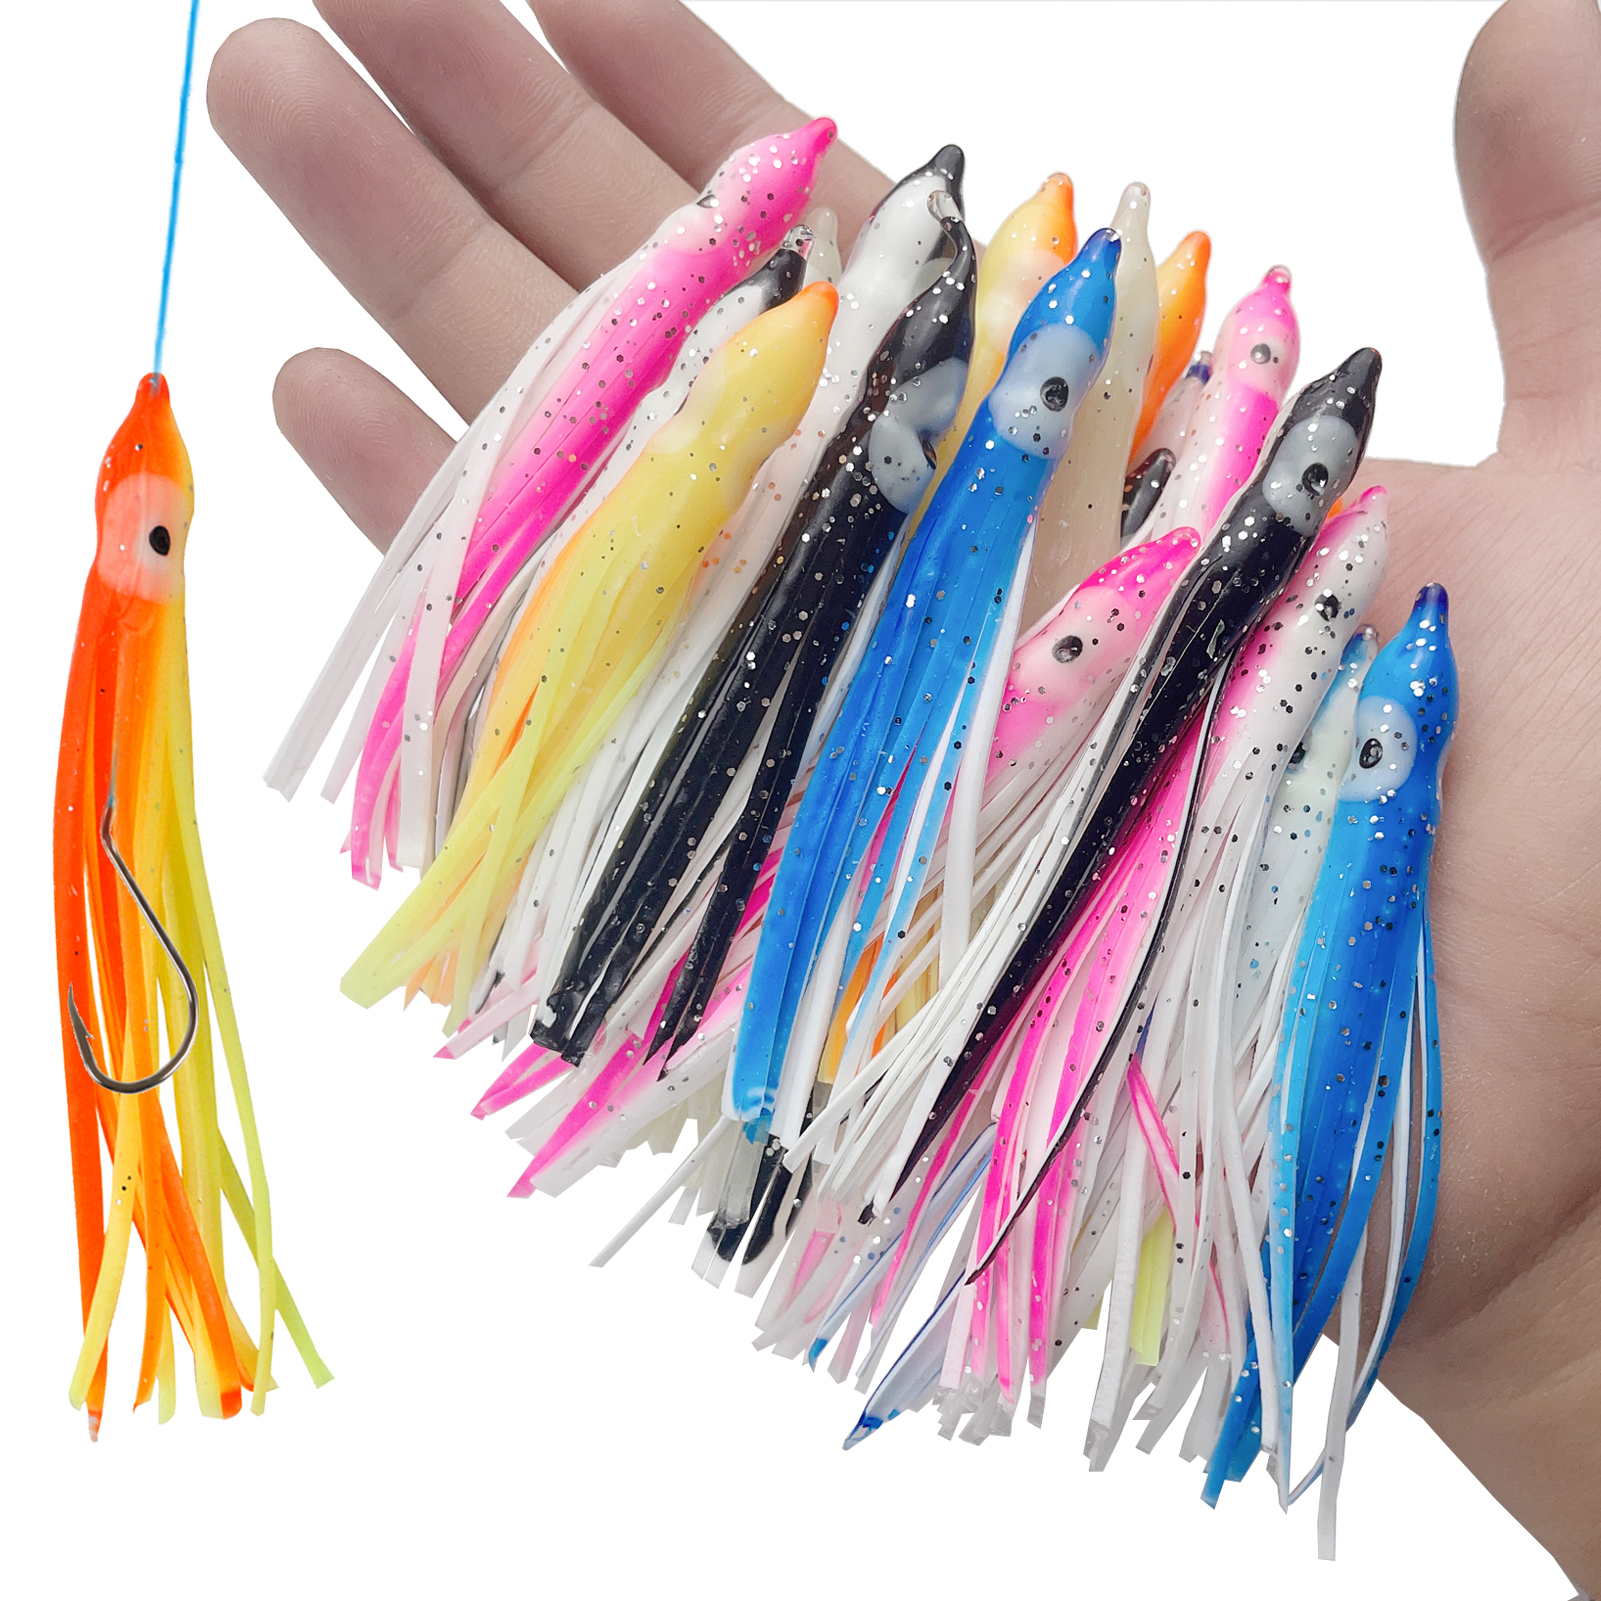 FREE FISHER 25pcs 9cm 4g Fishing Soft Octopus Lures with 3/0# 8299 Silver Hooks Luminous PVC Skrits Squids Artificial Baits Pesca